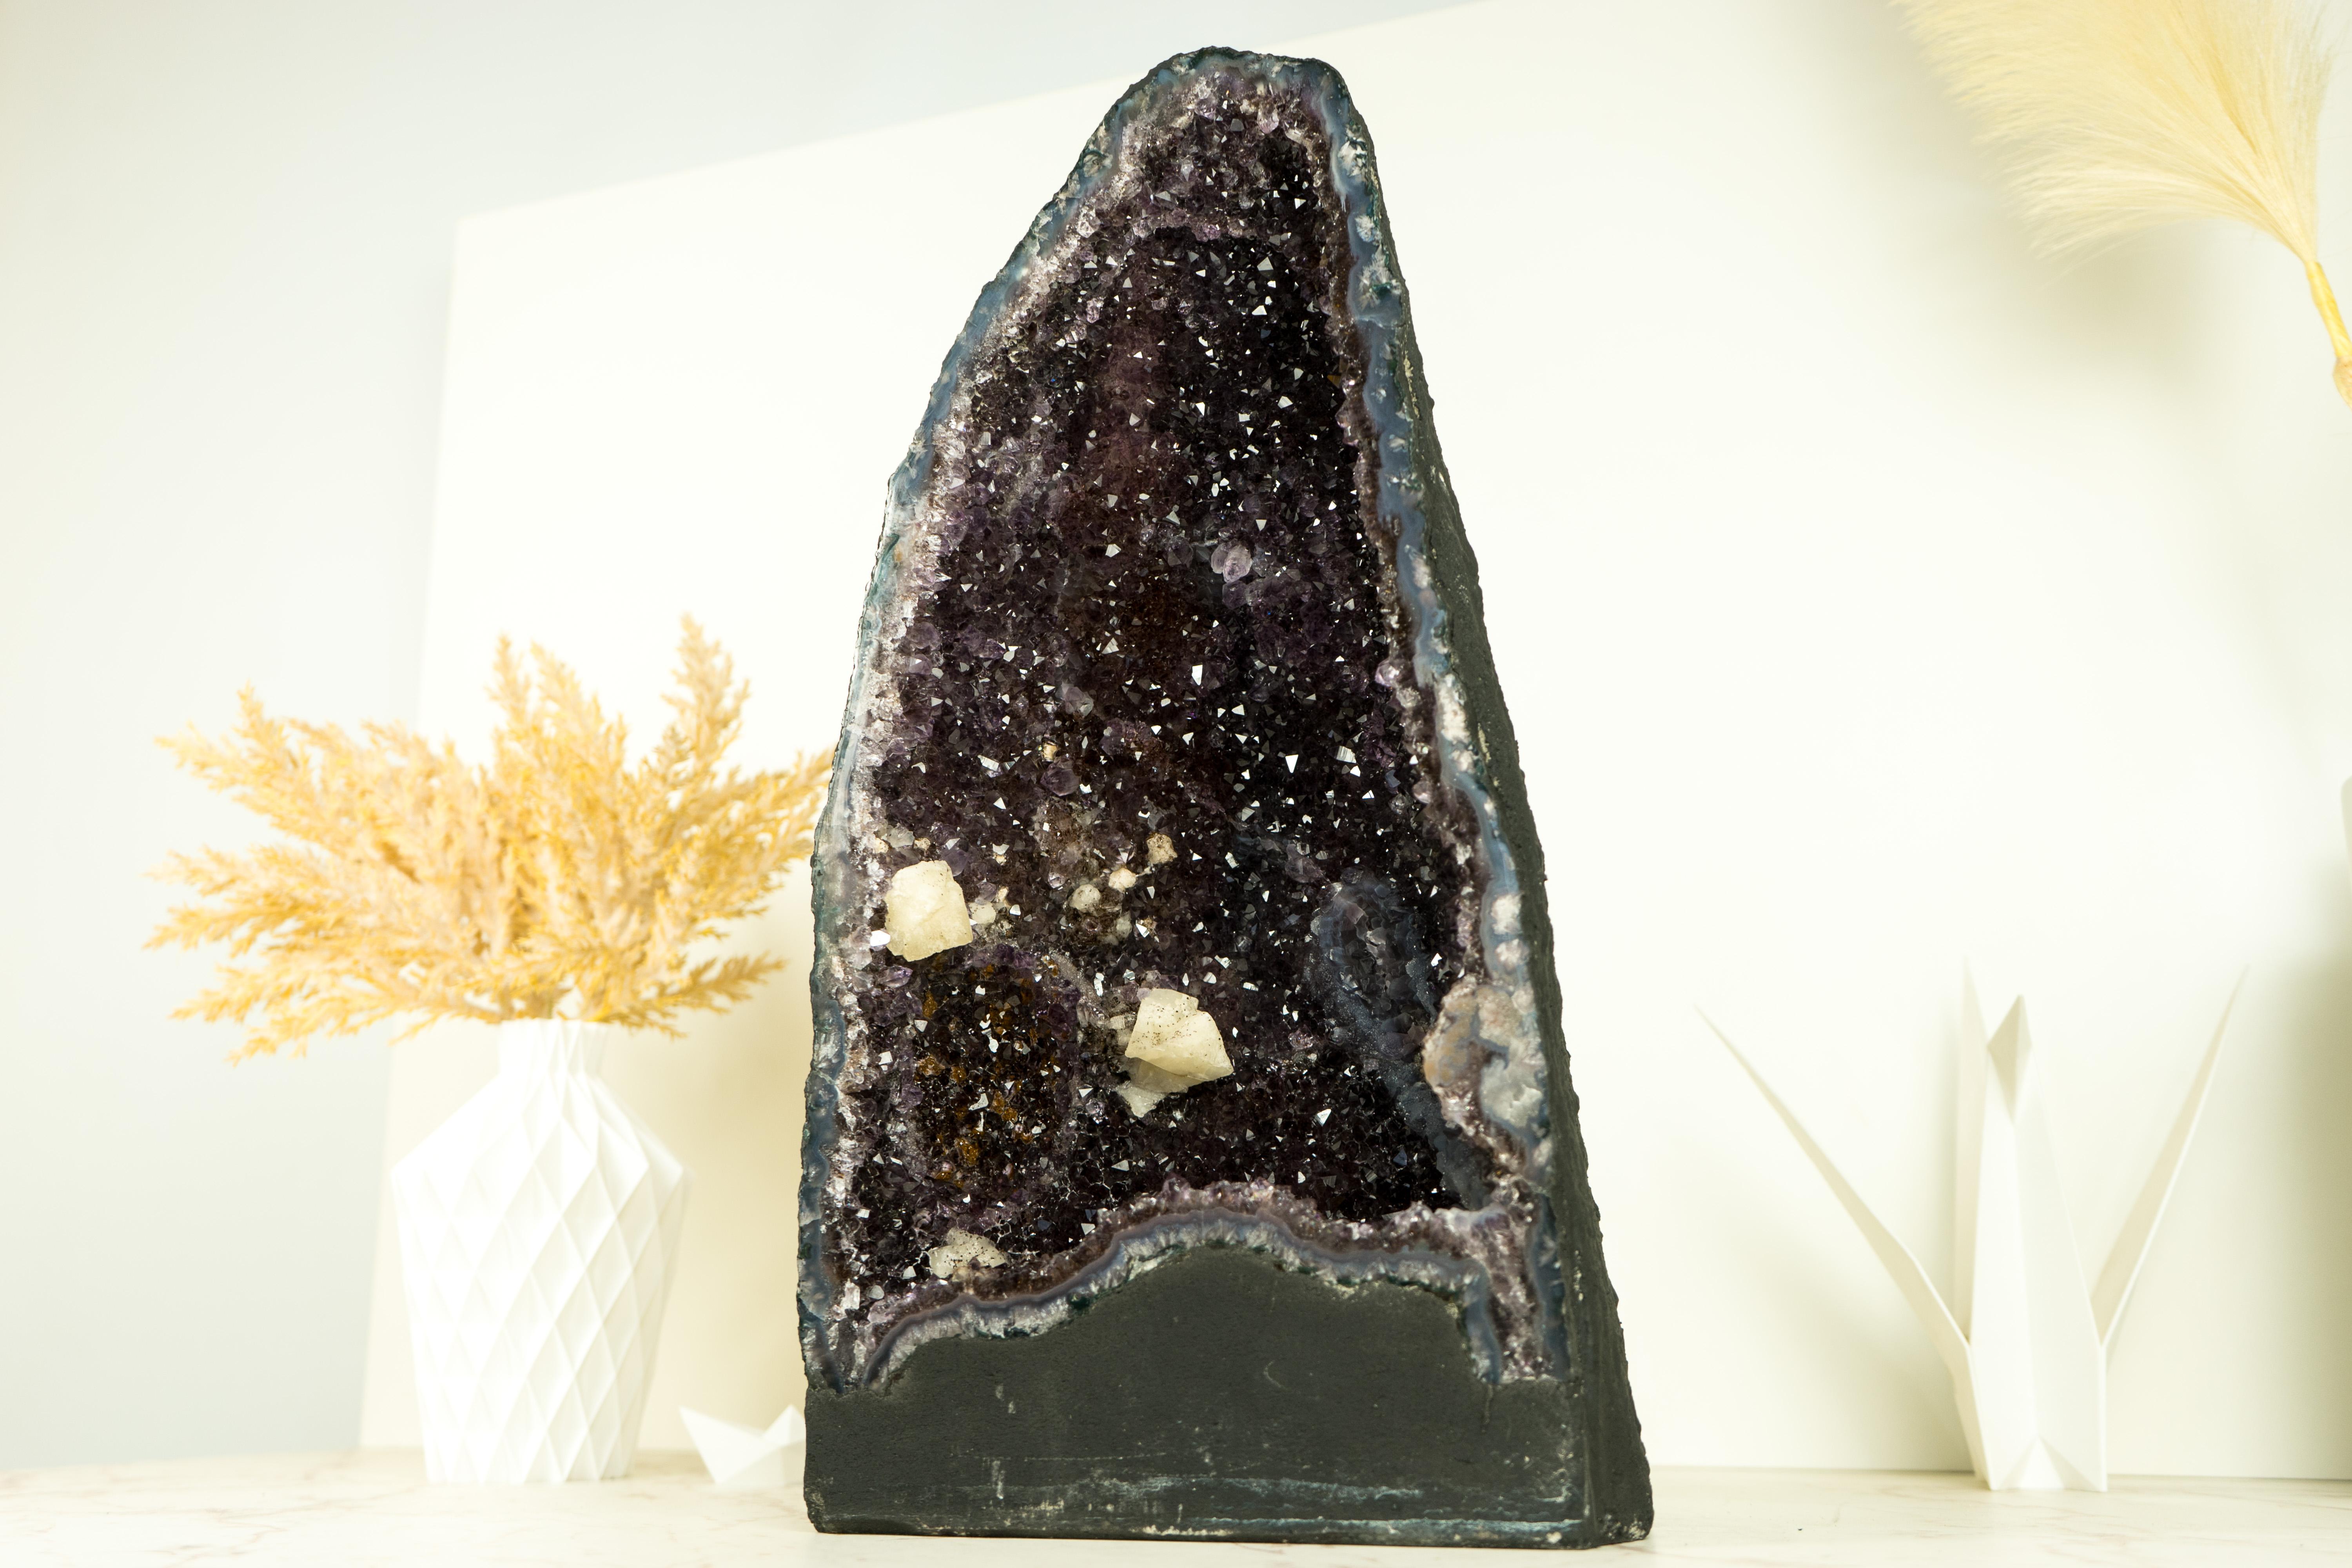 Elevate your space, decor, or collection with the captivating beauty of this Amethyst Geode featuring mesmerizing Galaxy Druzy. This geode brings dark purple Amethyst and calcite, making it a truly one-of-a-kind natural masterpiece.

The first